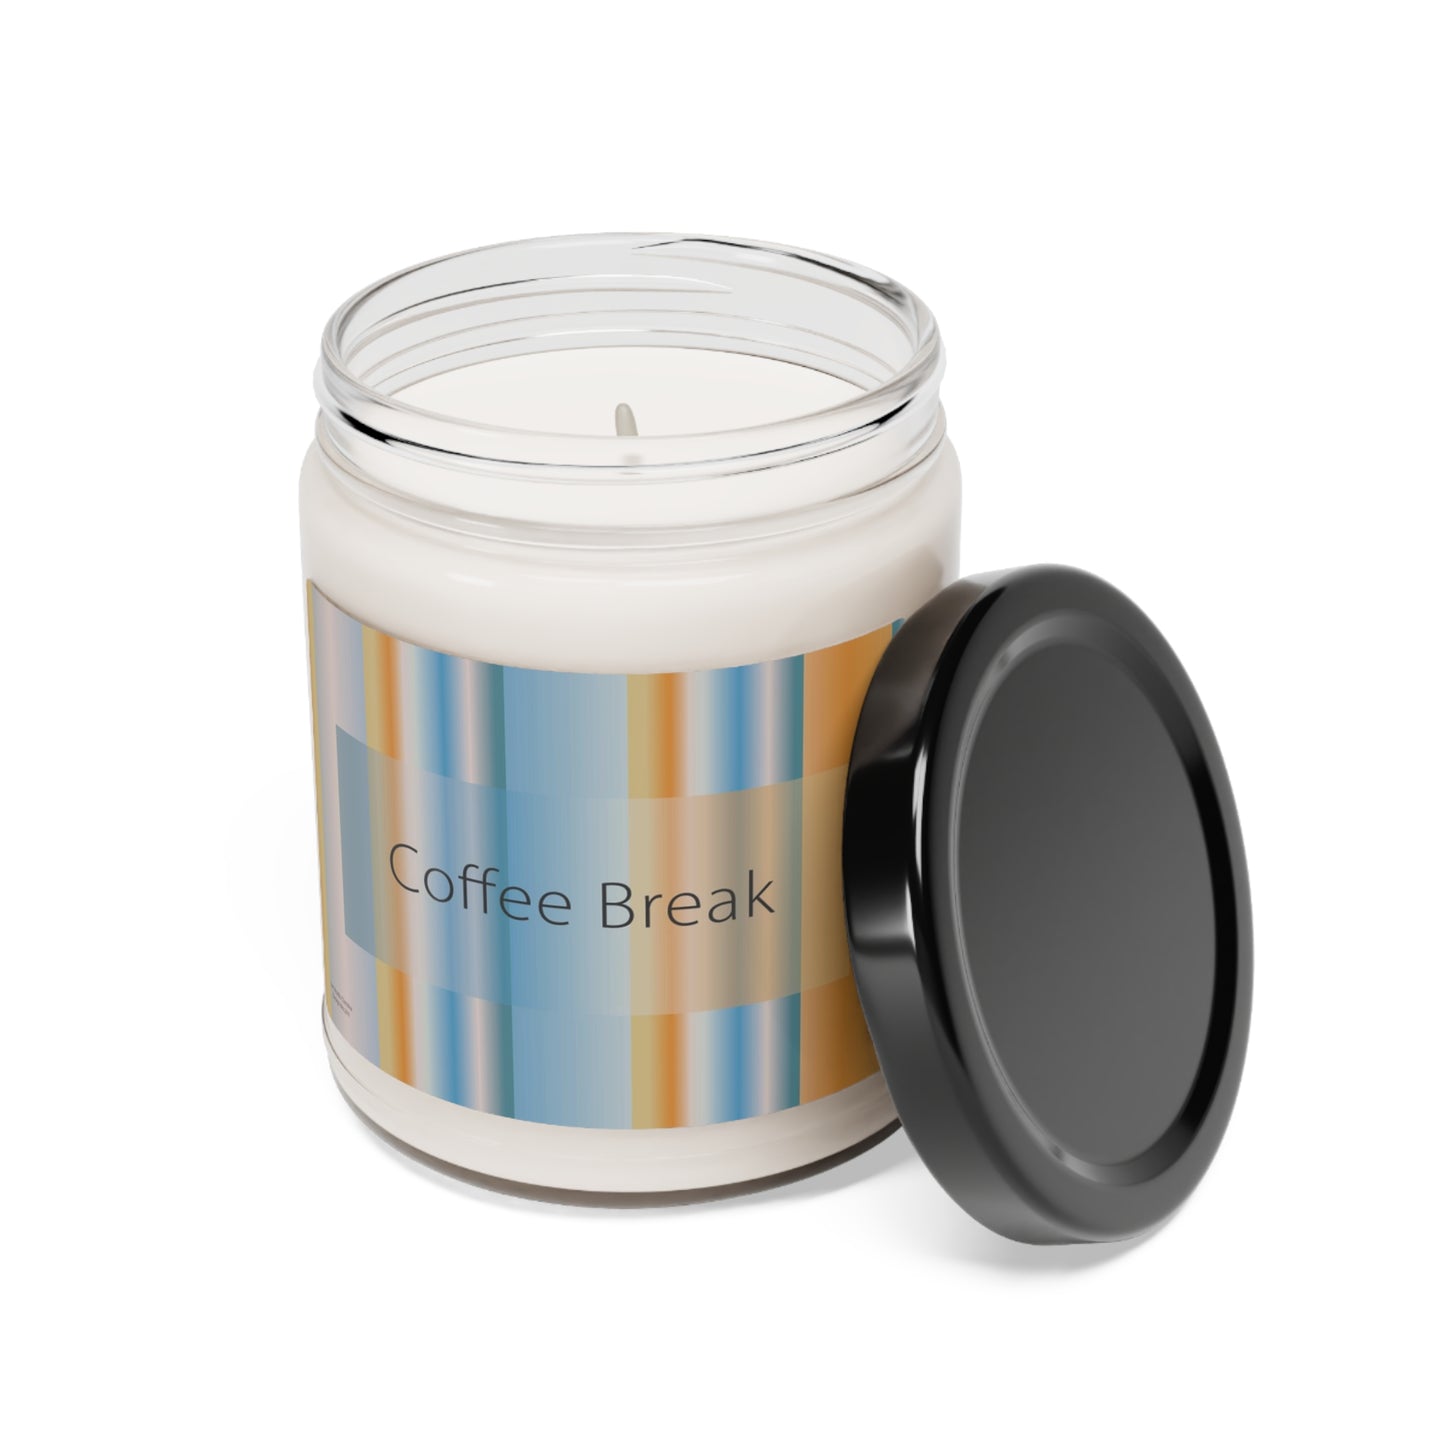 Scented Soy Candle, 9oz Coffee Break - Design No.201